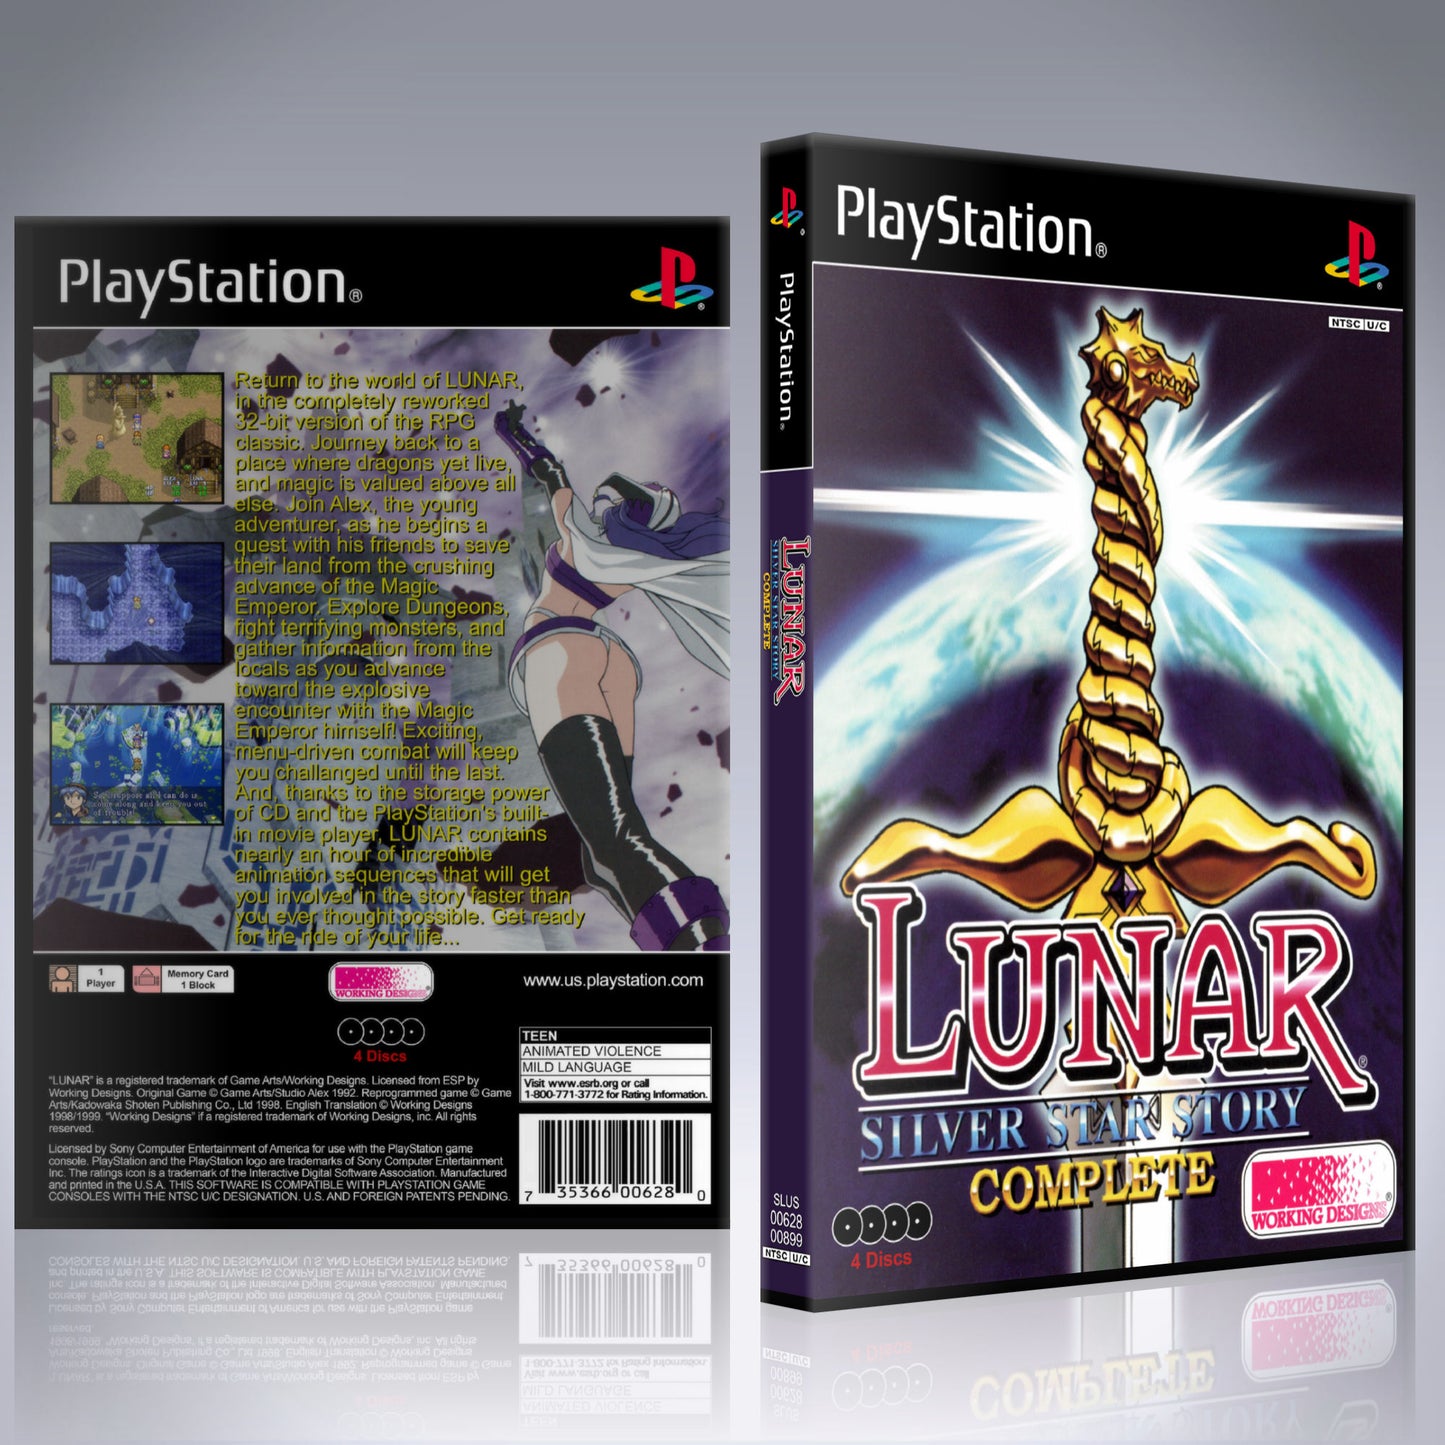 PS1 Case - NO GAME - Lunar - Silver Star Story Complete [4 DISC]